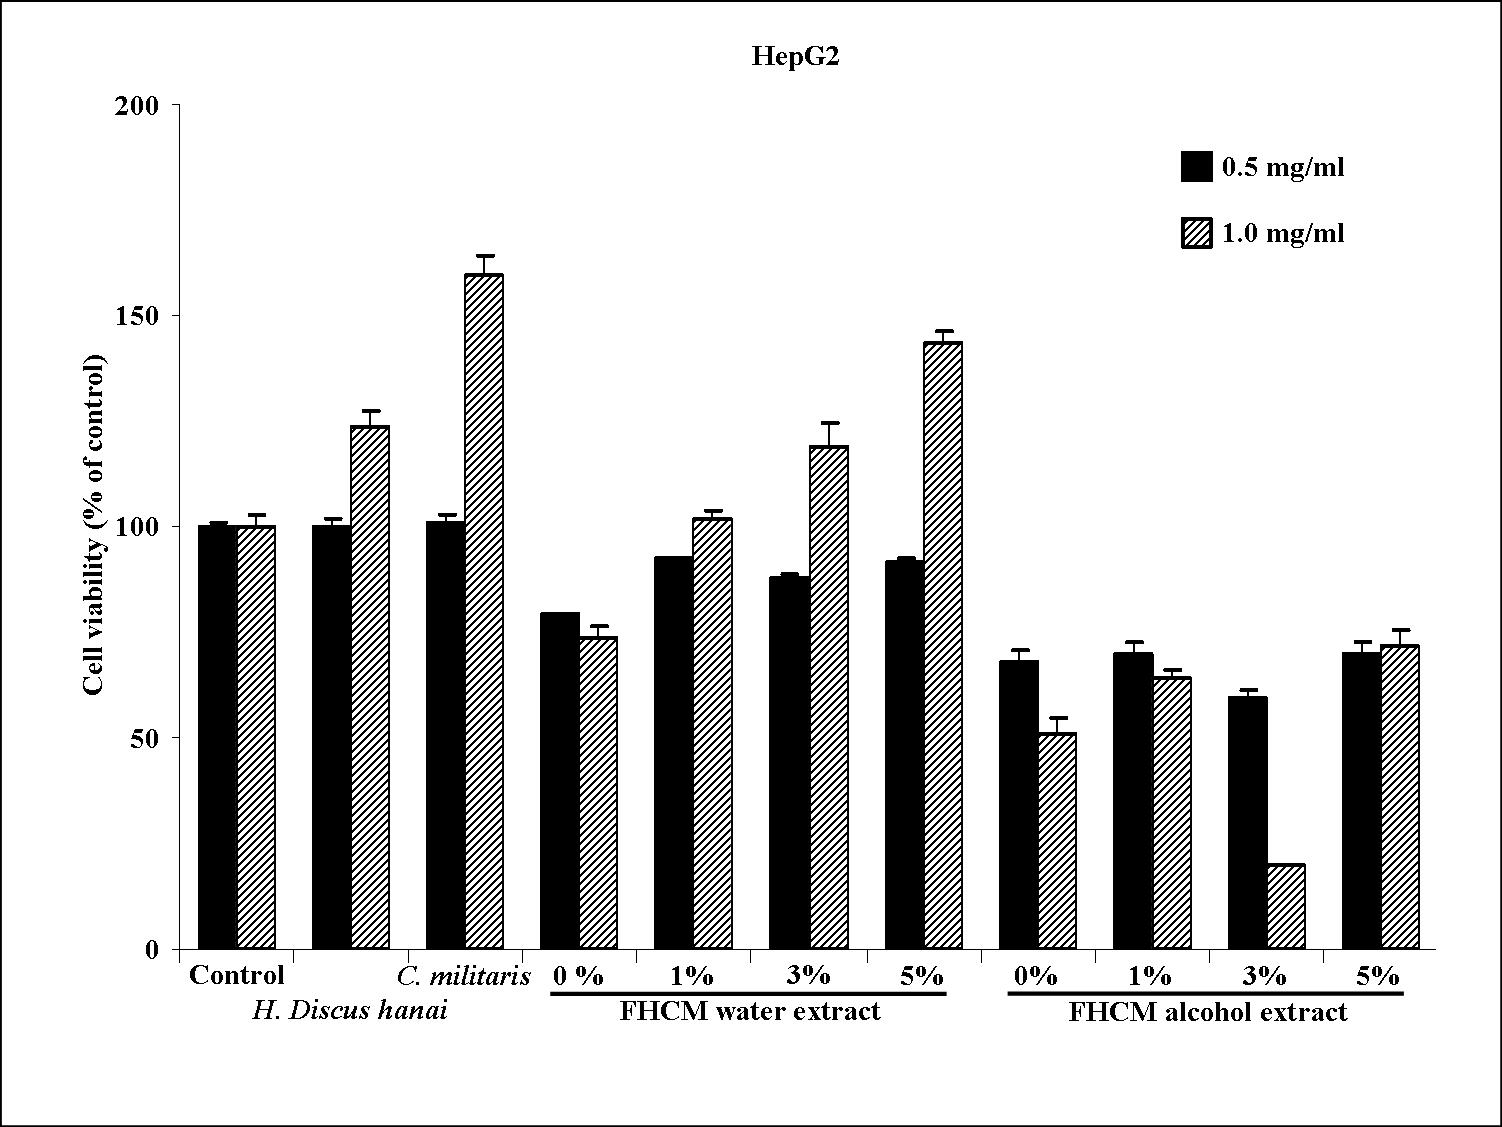 Cytotoxic effect of water and alcohol extracts of FHCM in HepG2 cells